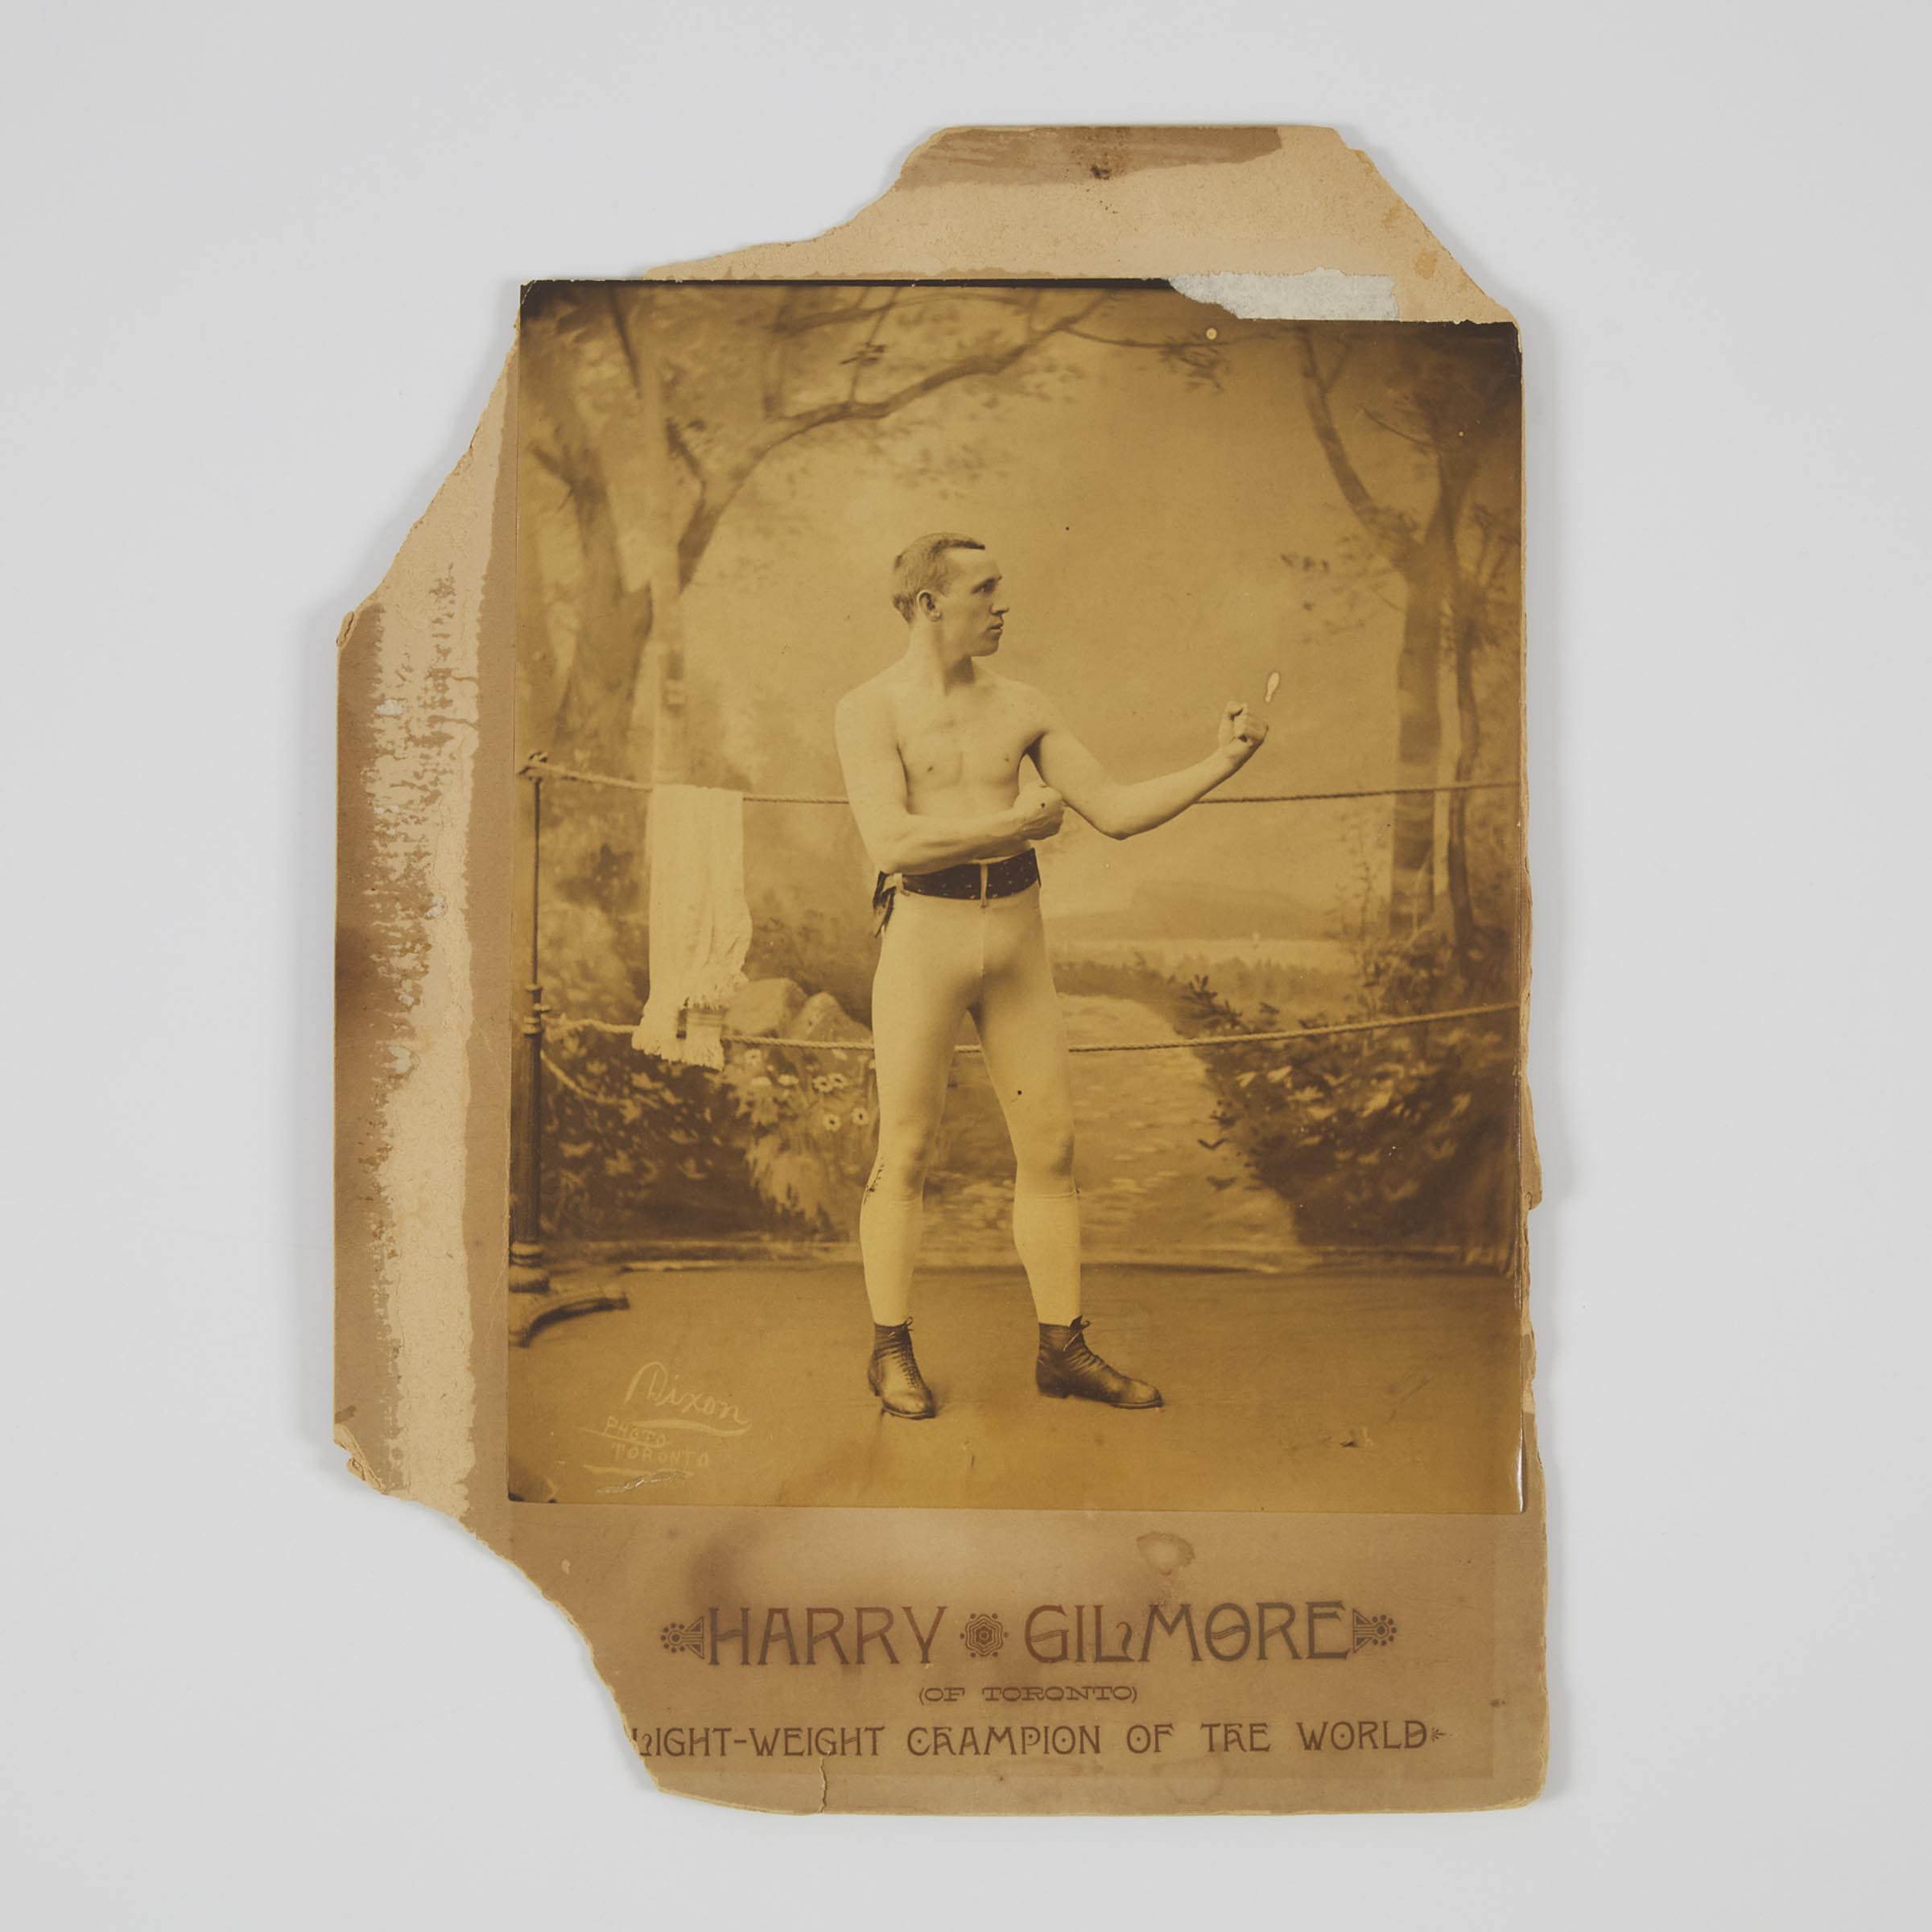 Albumin Publicity Photograph of Harry Gilmore (of Toronto) Light-Weight Champion of the World,  c.1881